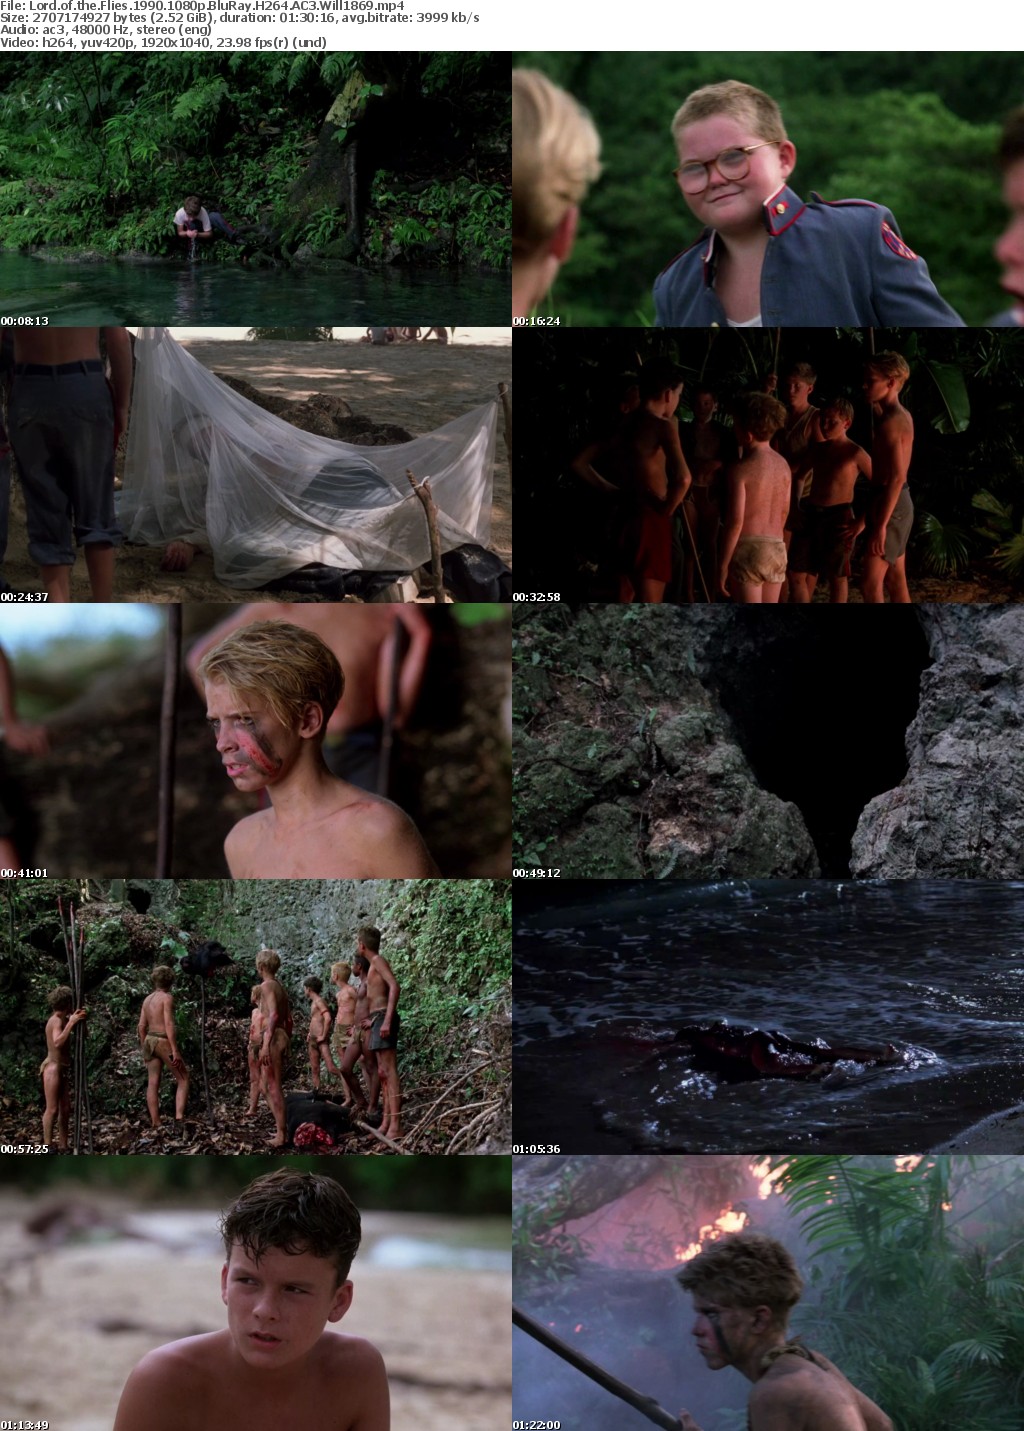 Lord of the Flies 1990 1080p BluRay H264 AC3 Will1869